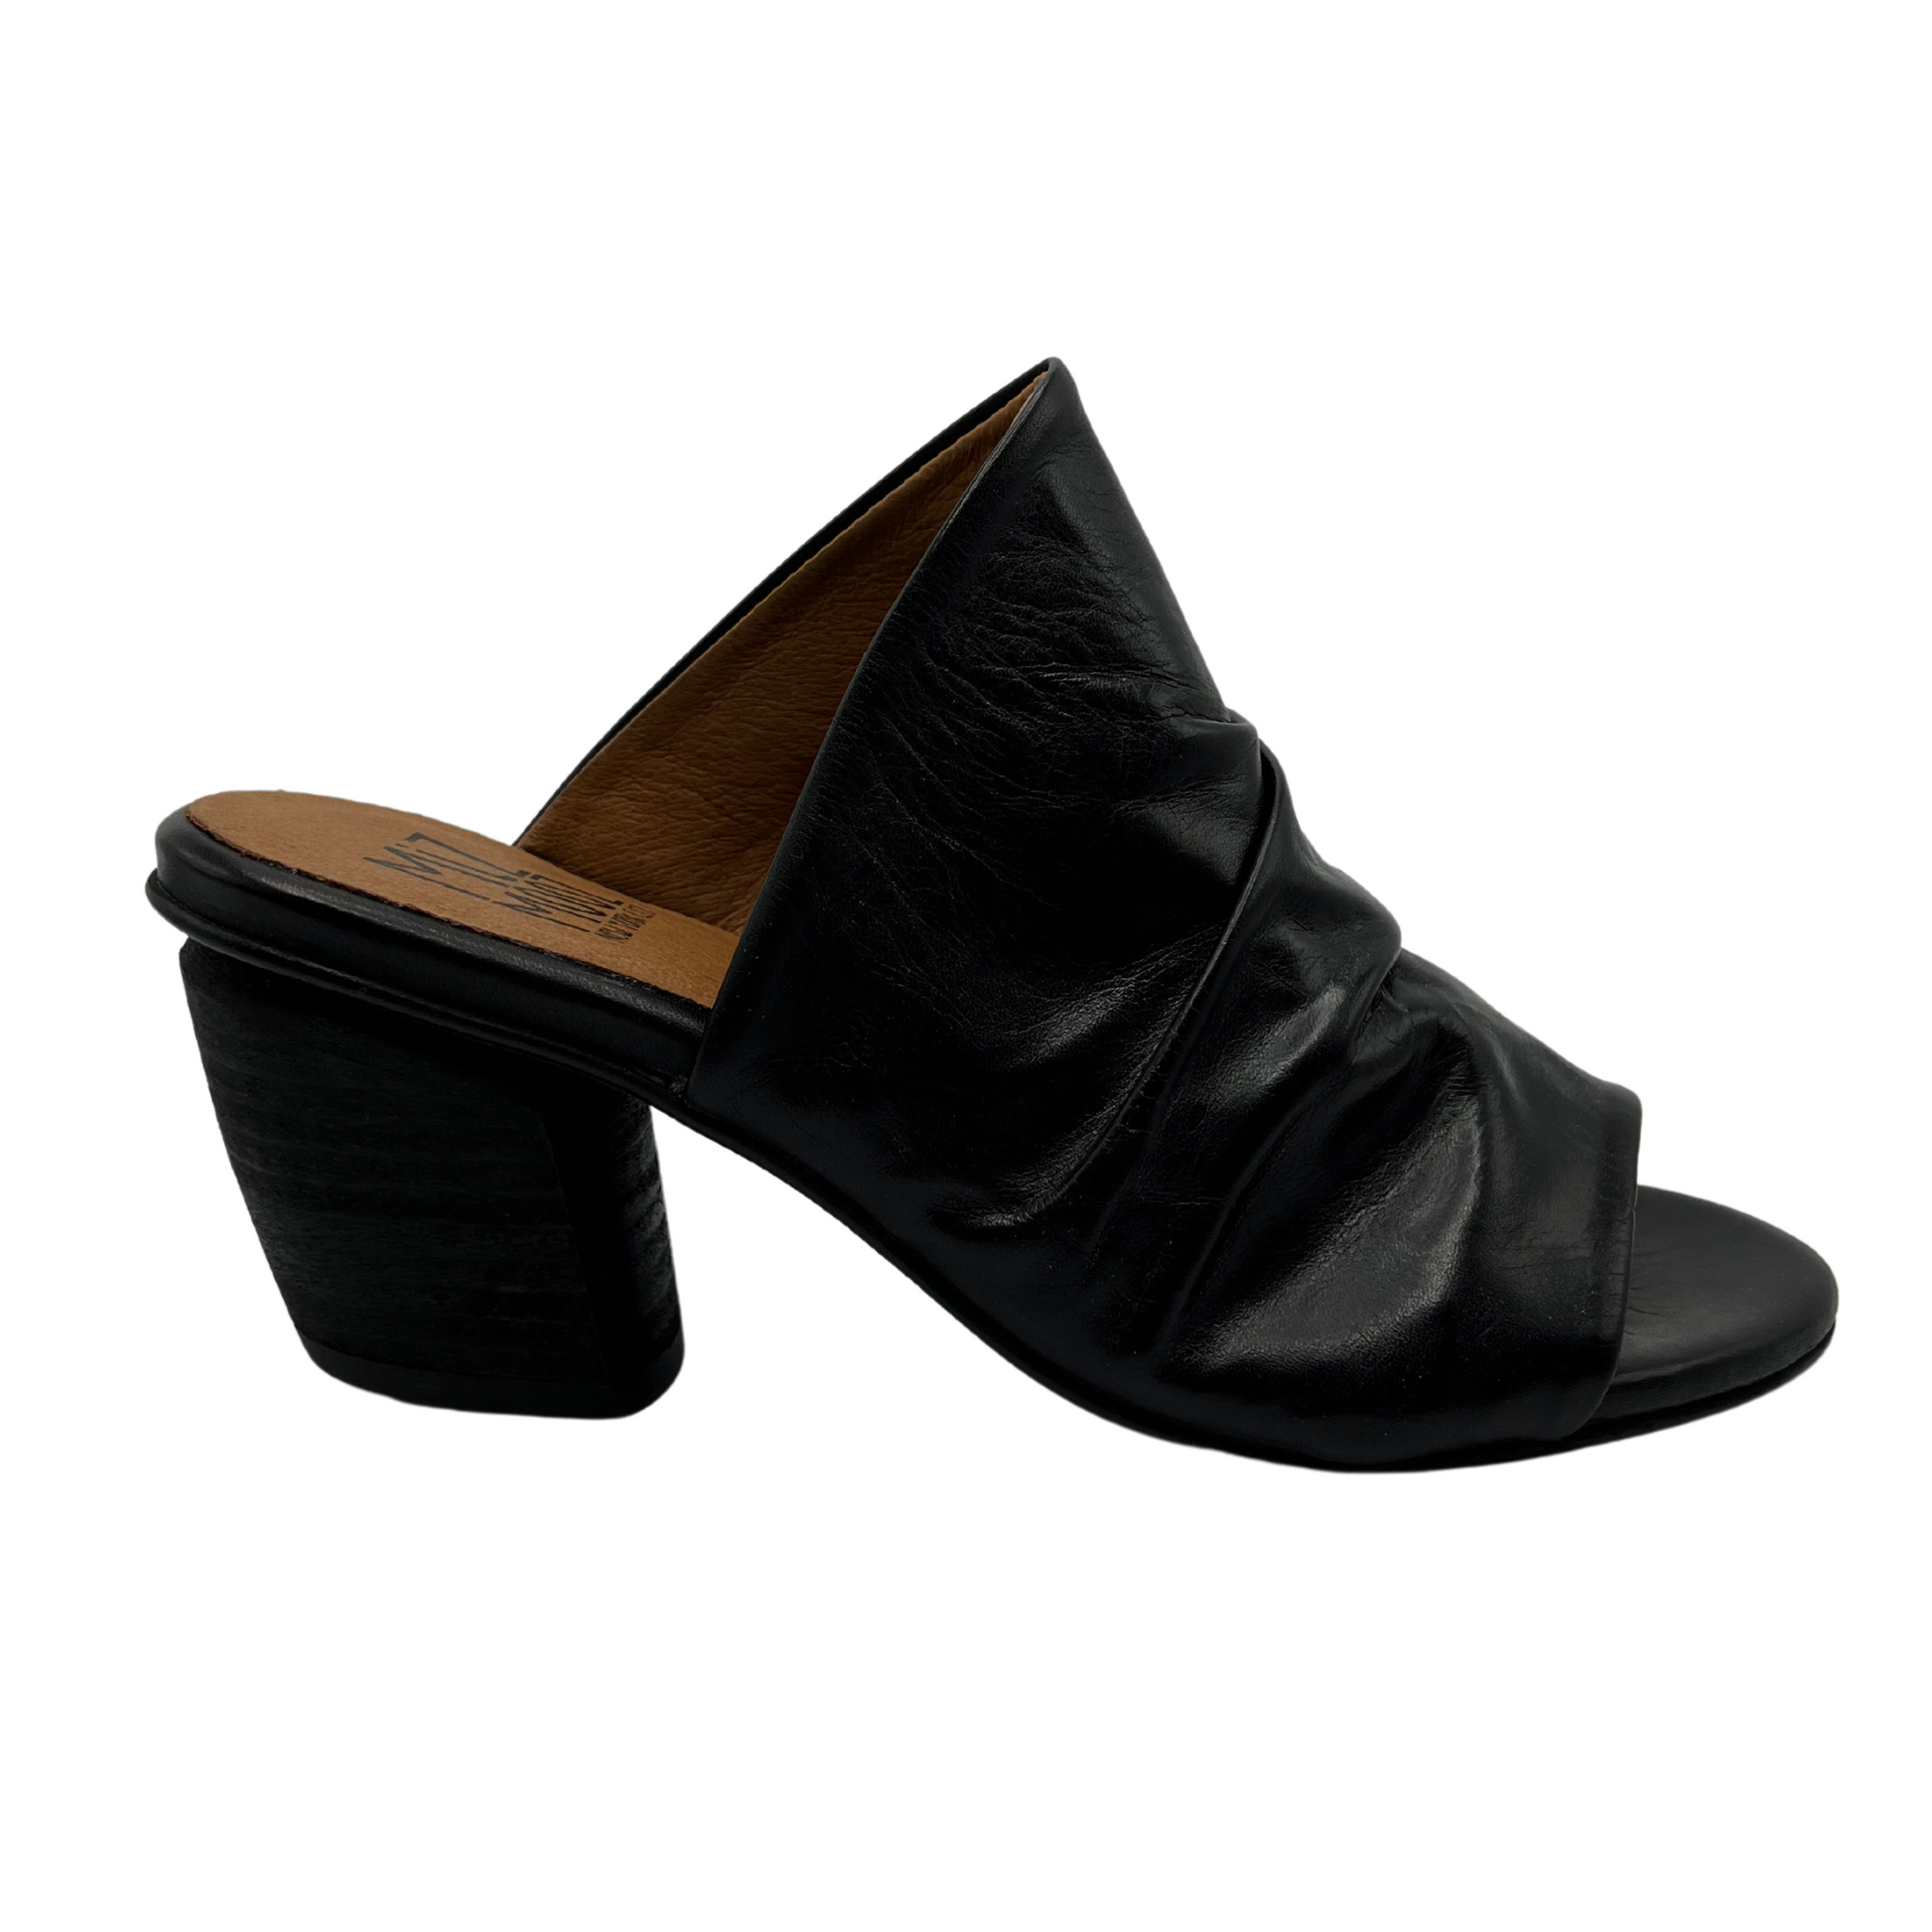 Right facing view of slouchy leather sandal in black. With a muled heel and open toe.